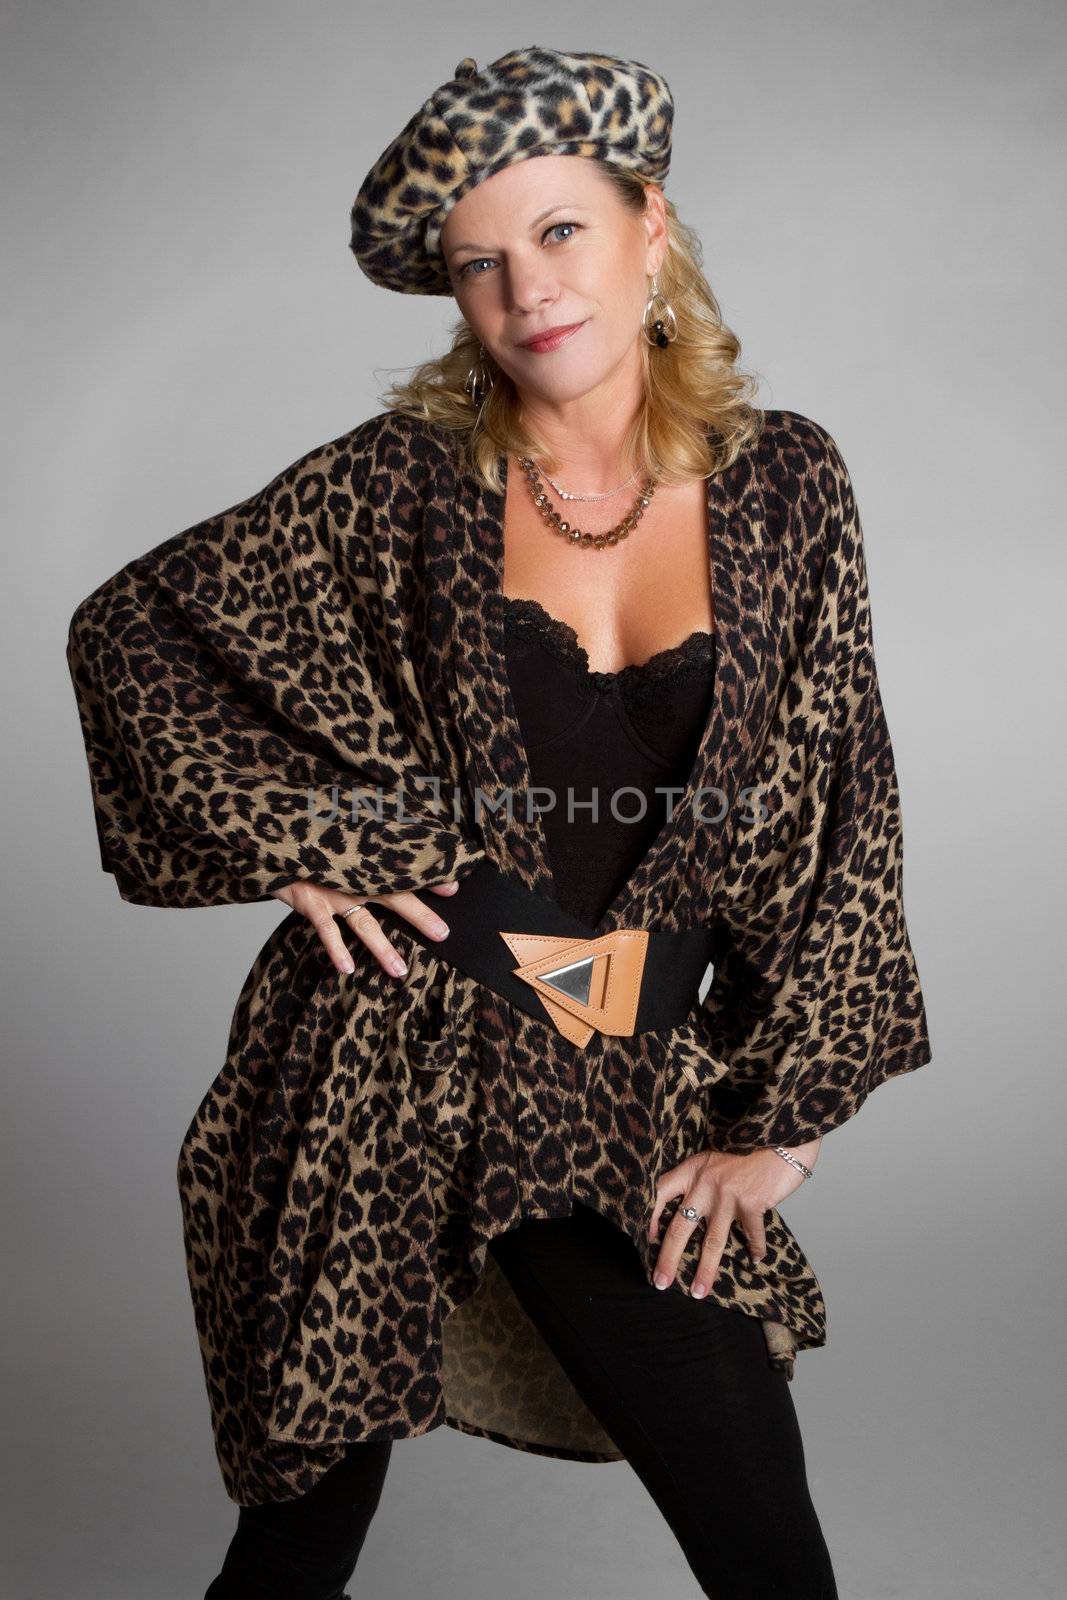 Middle Aged Cougar Woman by keeweeboy